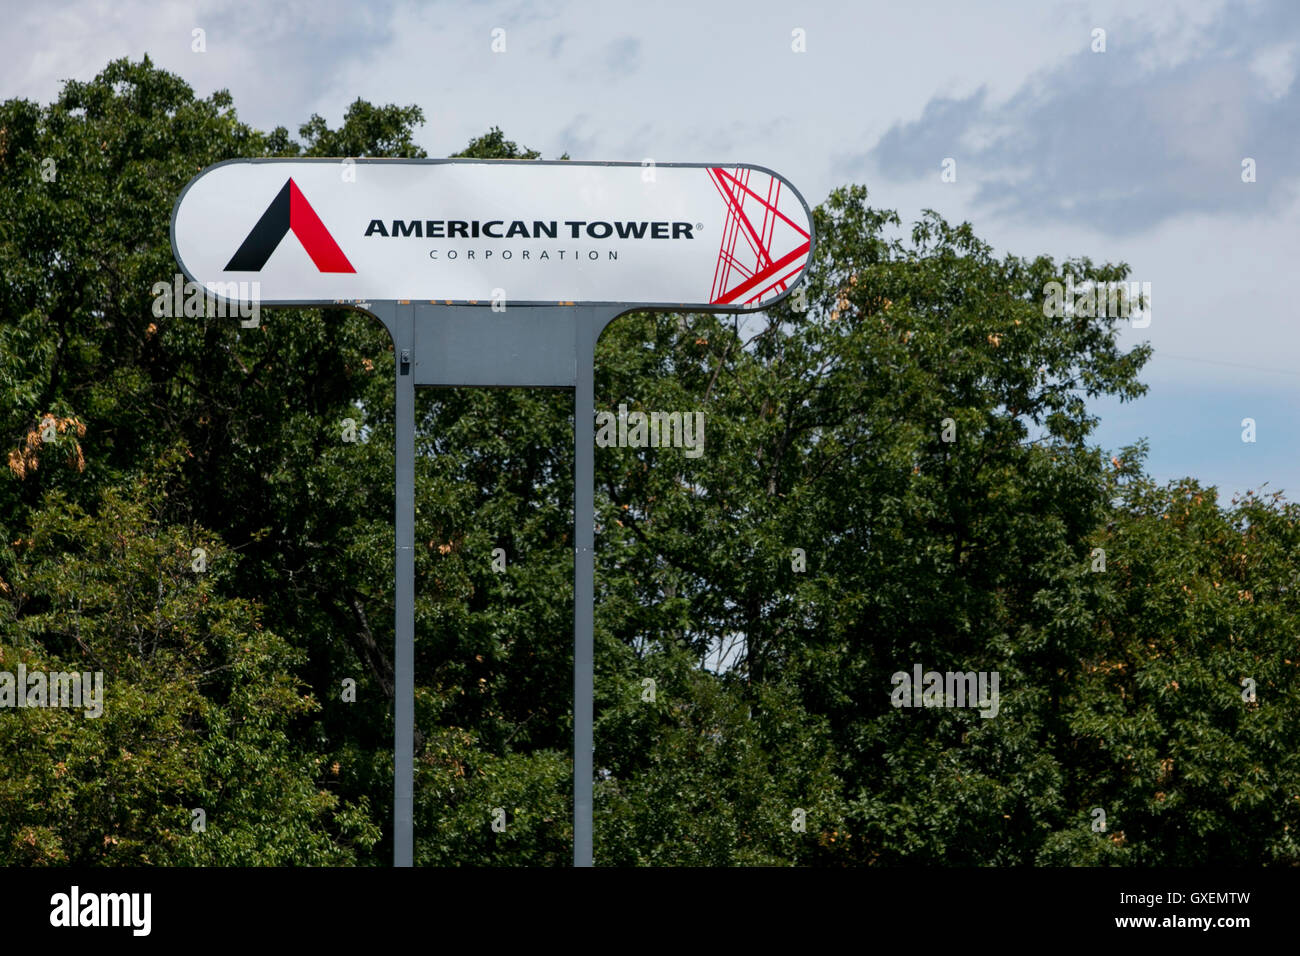 A logo sign outside of a facility occupied by the American Tower Corporation in Woburn, Massachusetts on August 14, 2016. Stock Photo